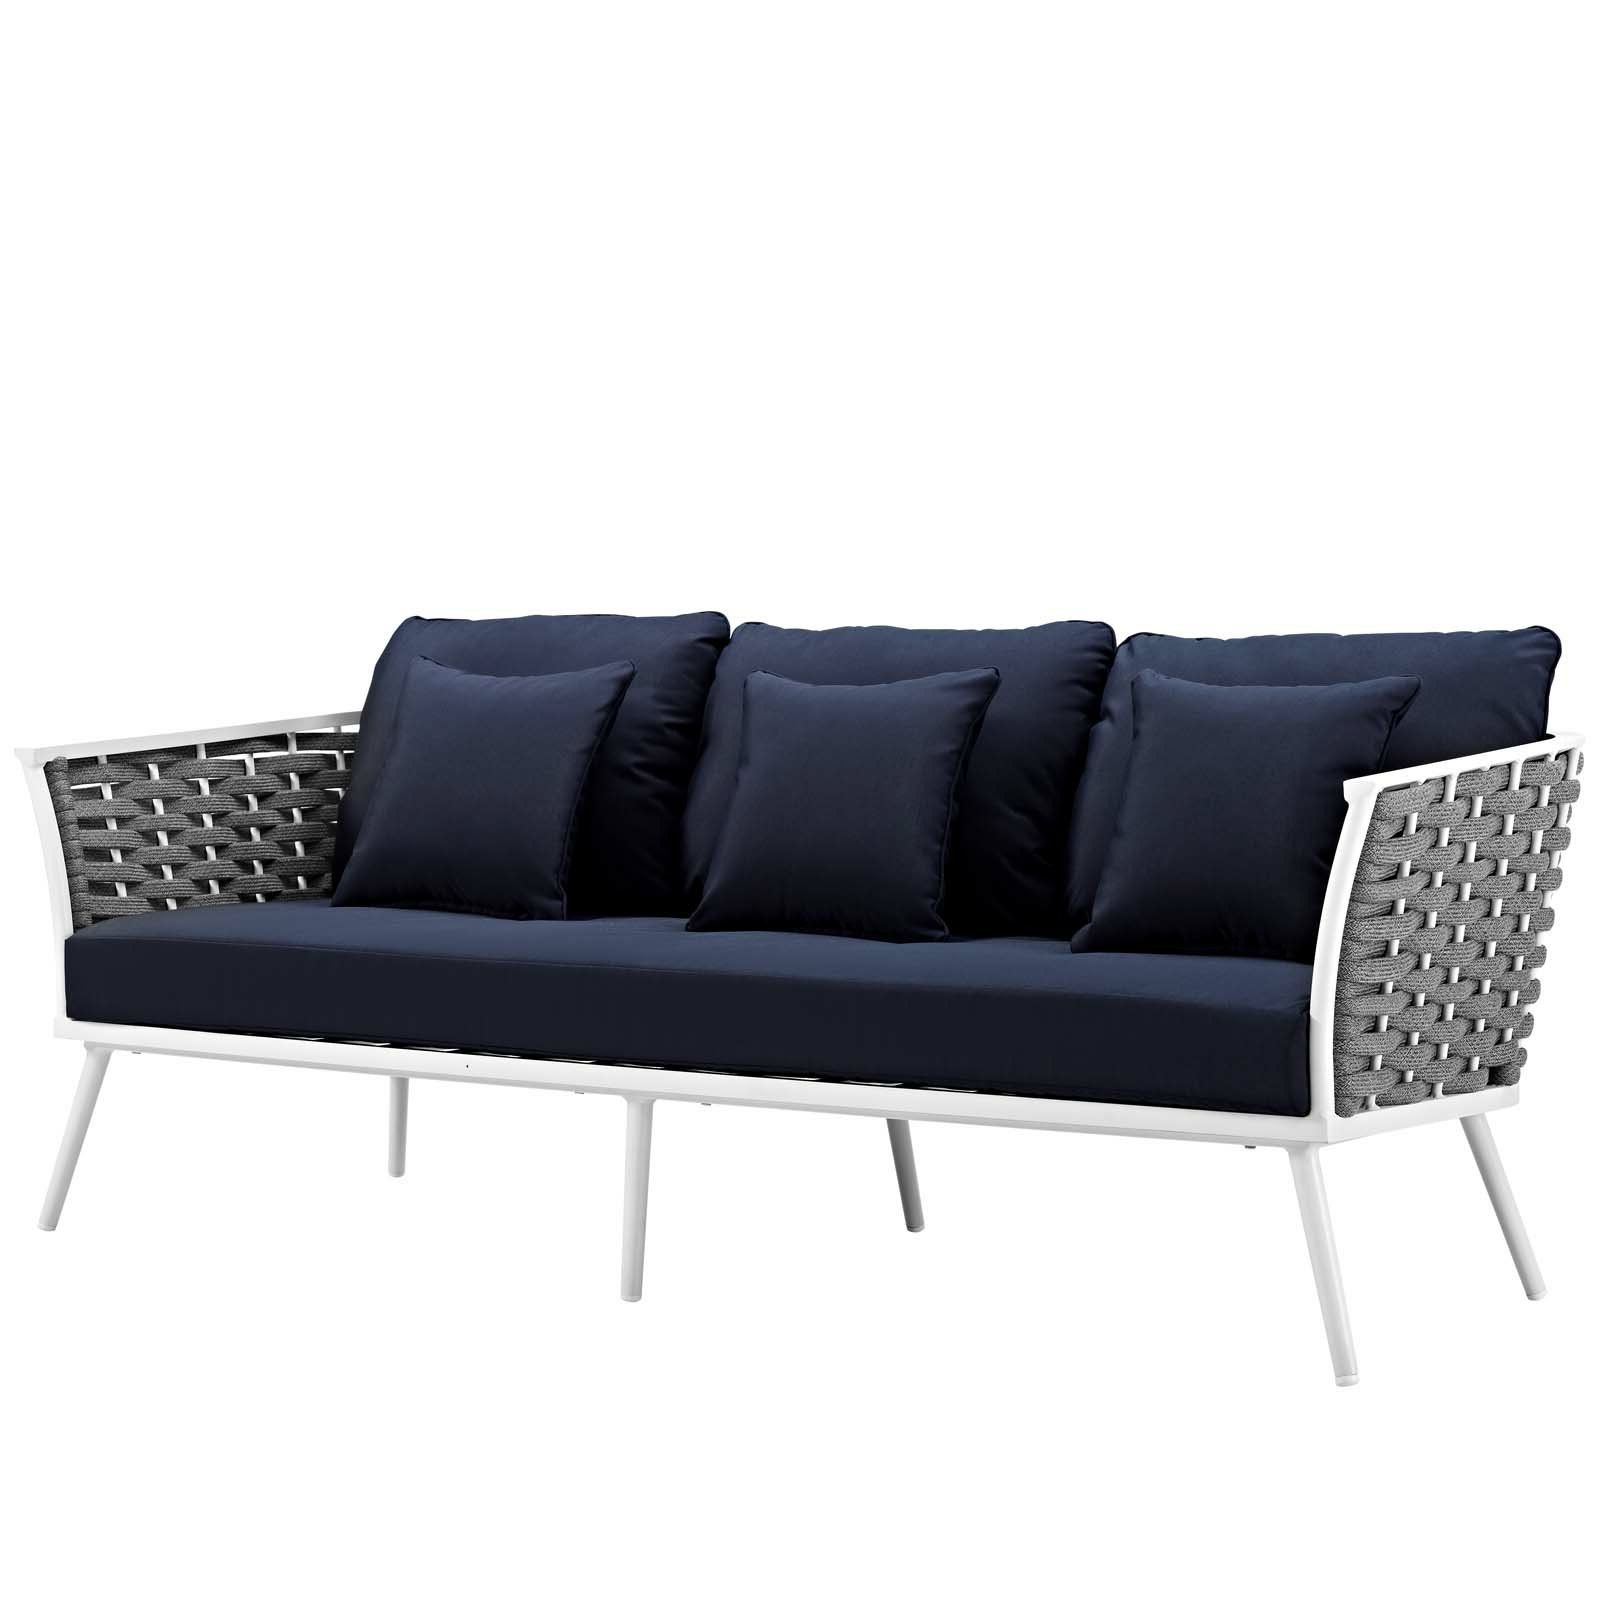 Famous Rossville Outdoor Patio Sofa With Cushions For Jamilla Teak Patio Sofas With Cushion (View 13 of 25)